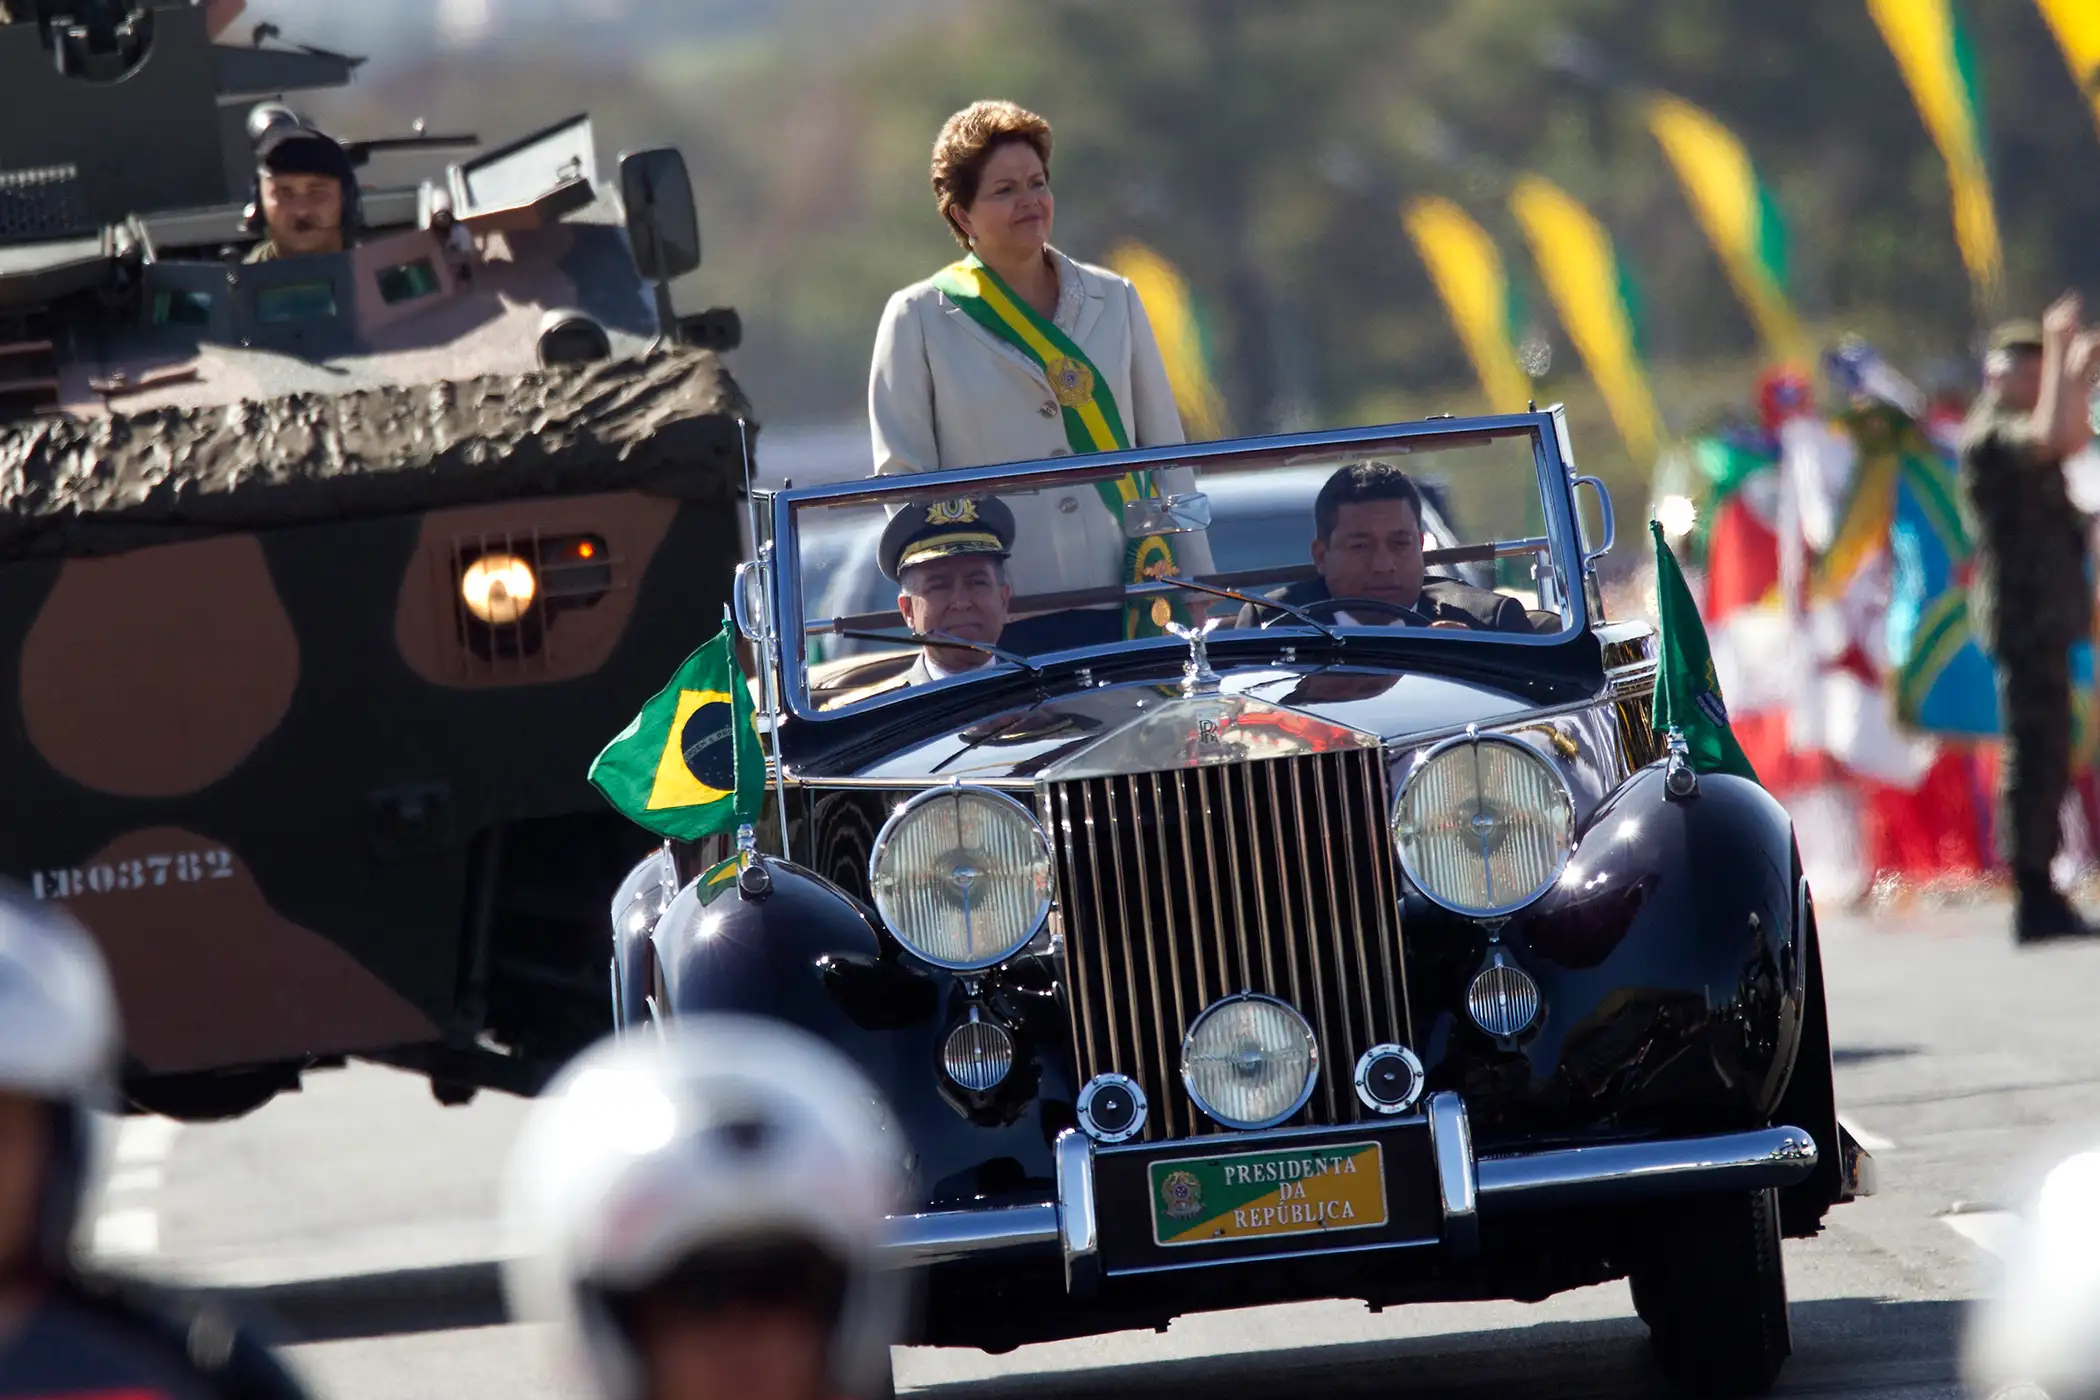 Brazil's President Dilma Rousseff stands in a vehicle during a civic-military parade commemorating of Brazilian independence Day September 7, 2012.